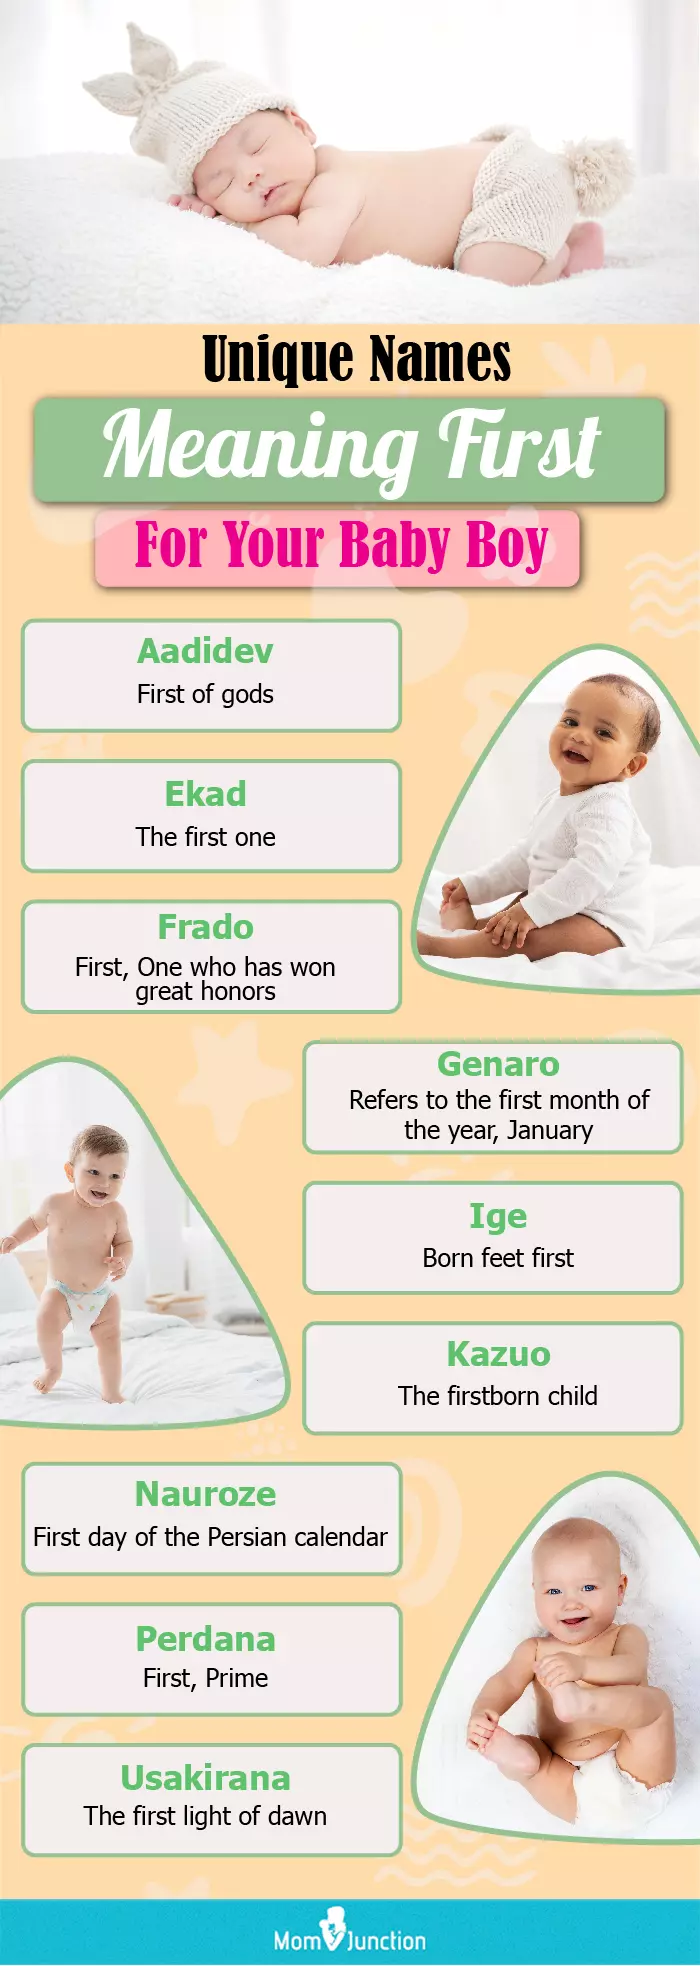 awesome baby boy names meaning first (infographic)